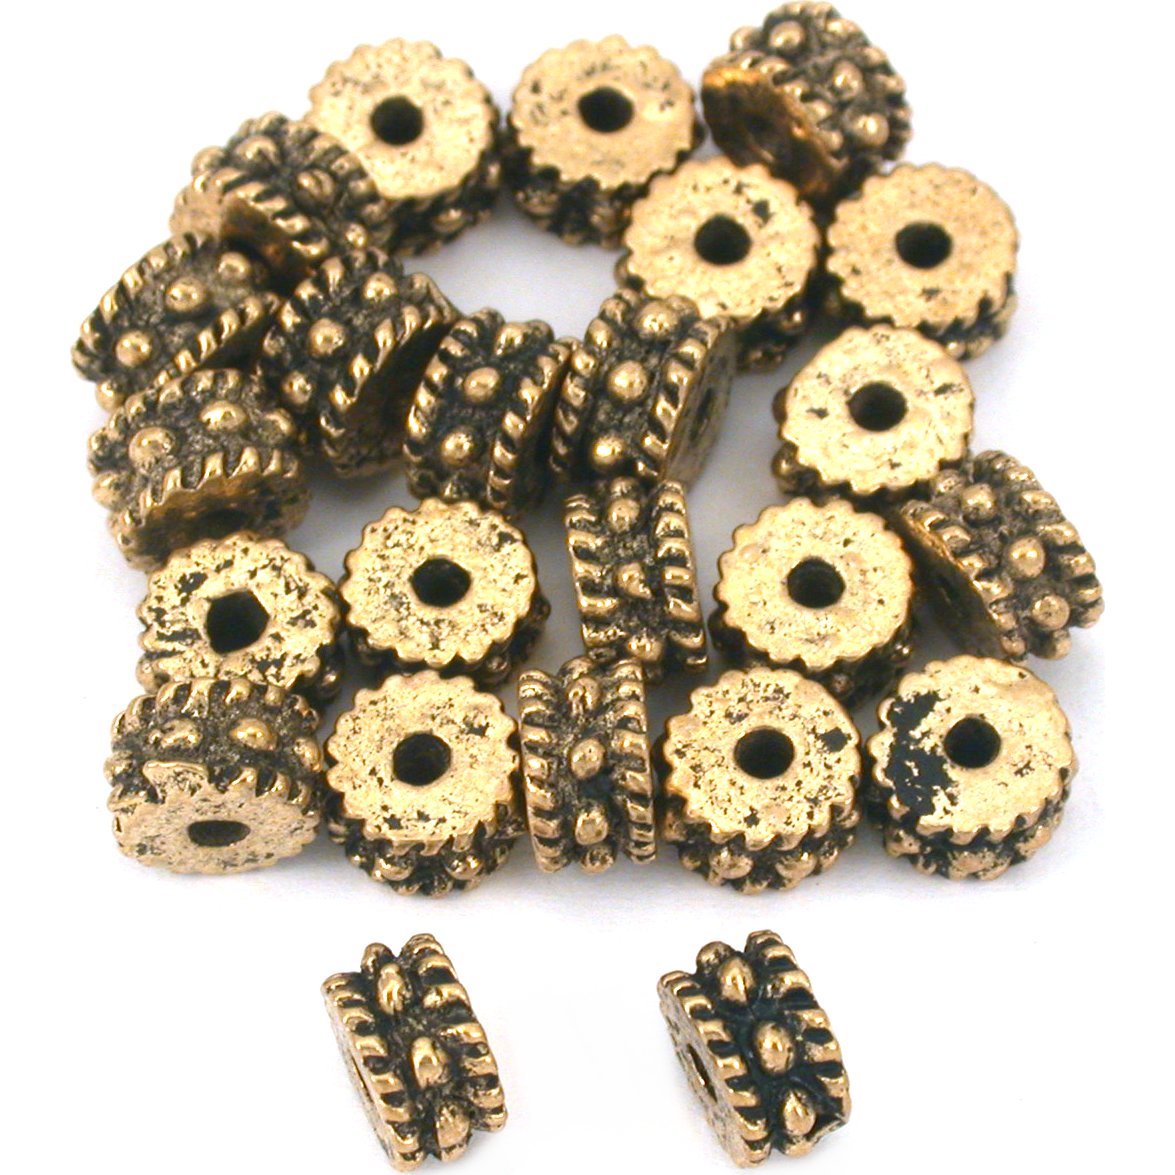 Bali Spacer Antique Gold Plated Beads 4mm 25Pcs Approx.